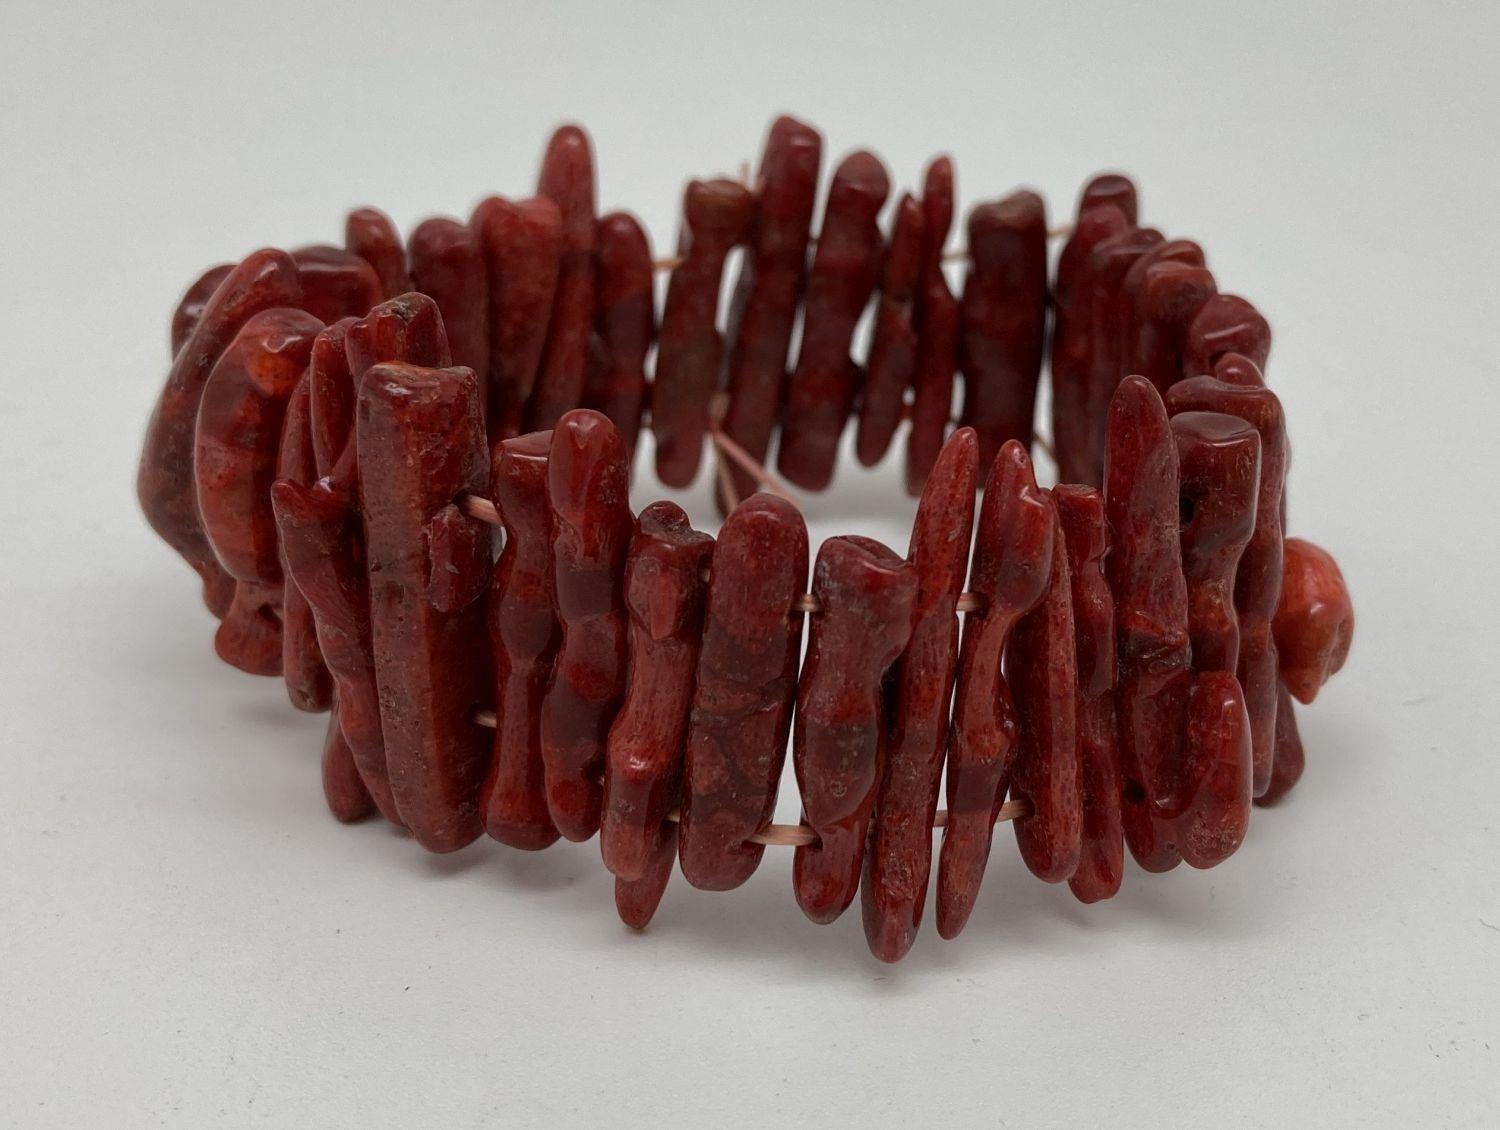 A costume jewellery elasticated bracelet made from long pieces of stem coral in a deep red/brown